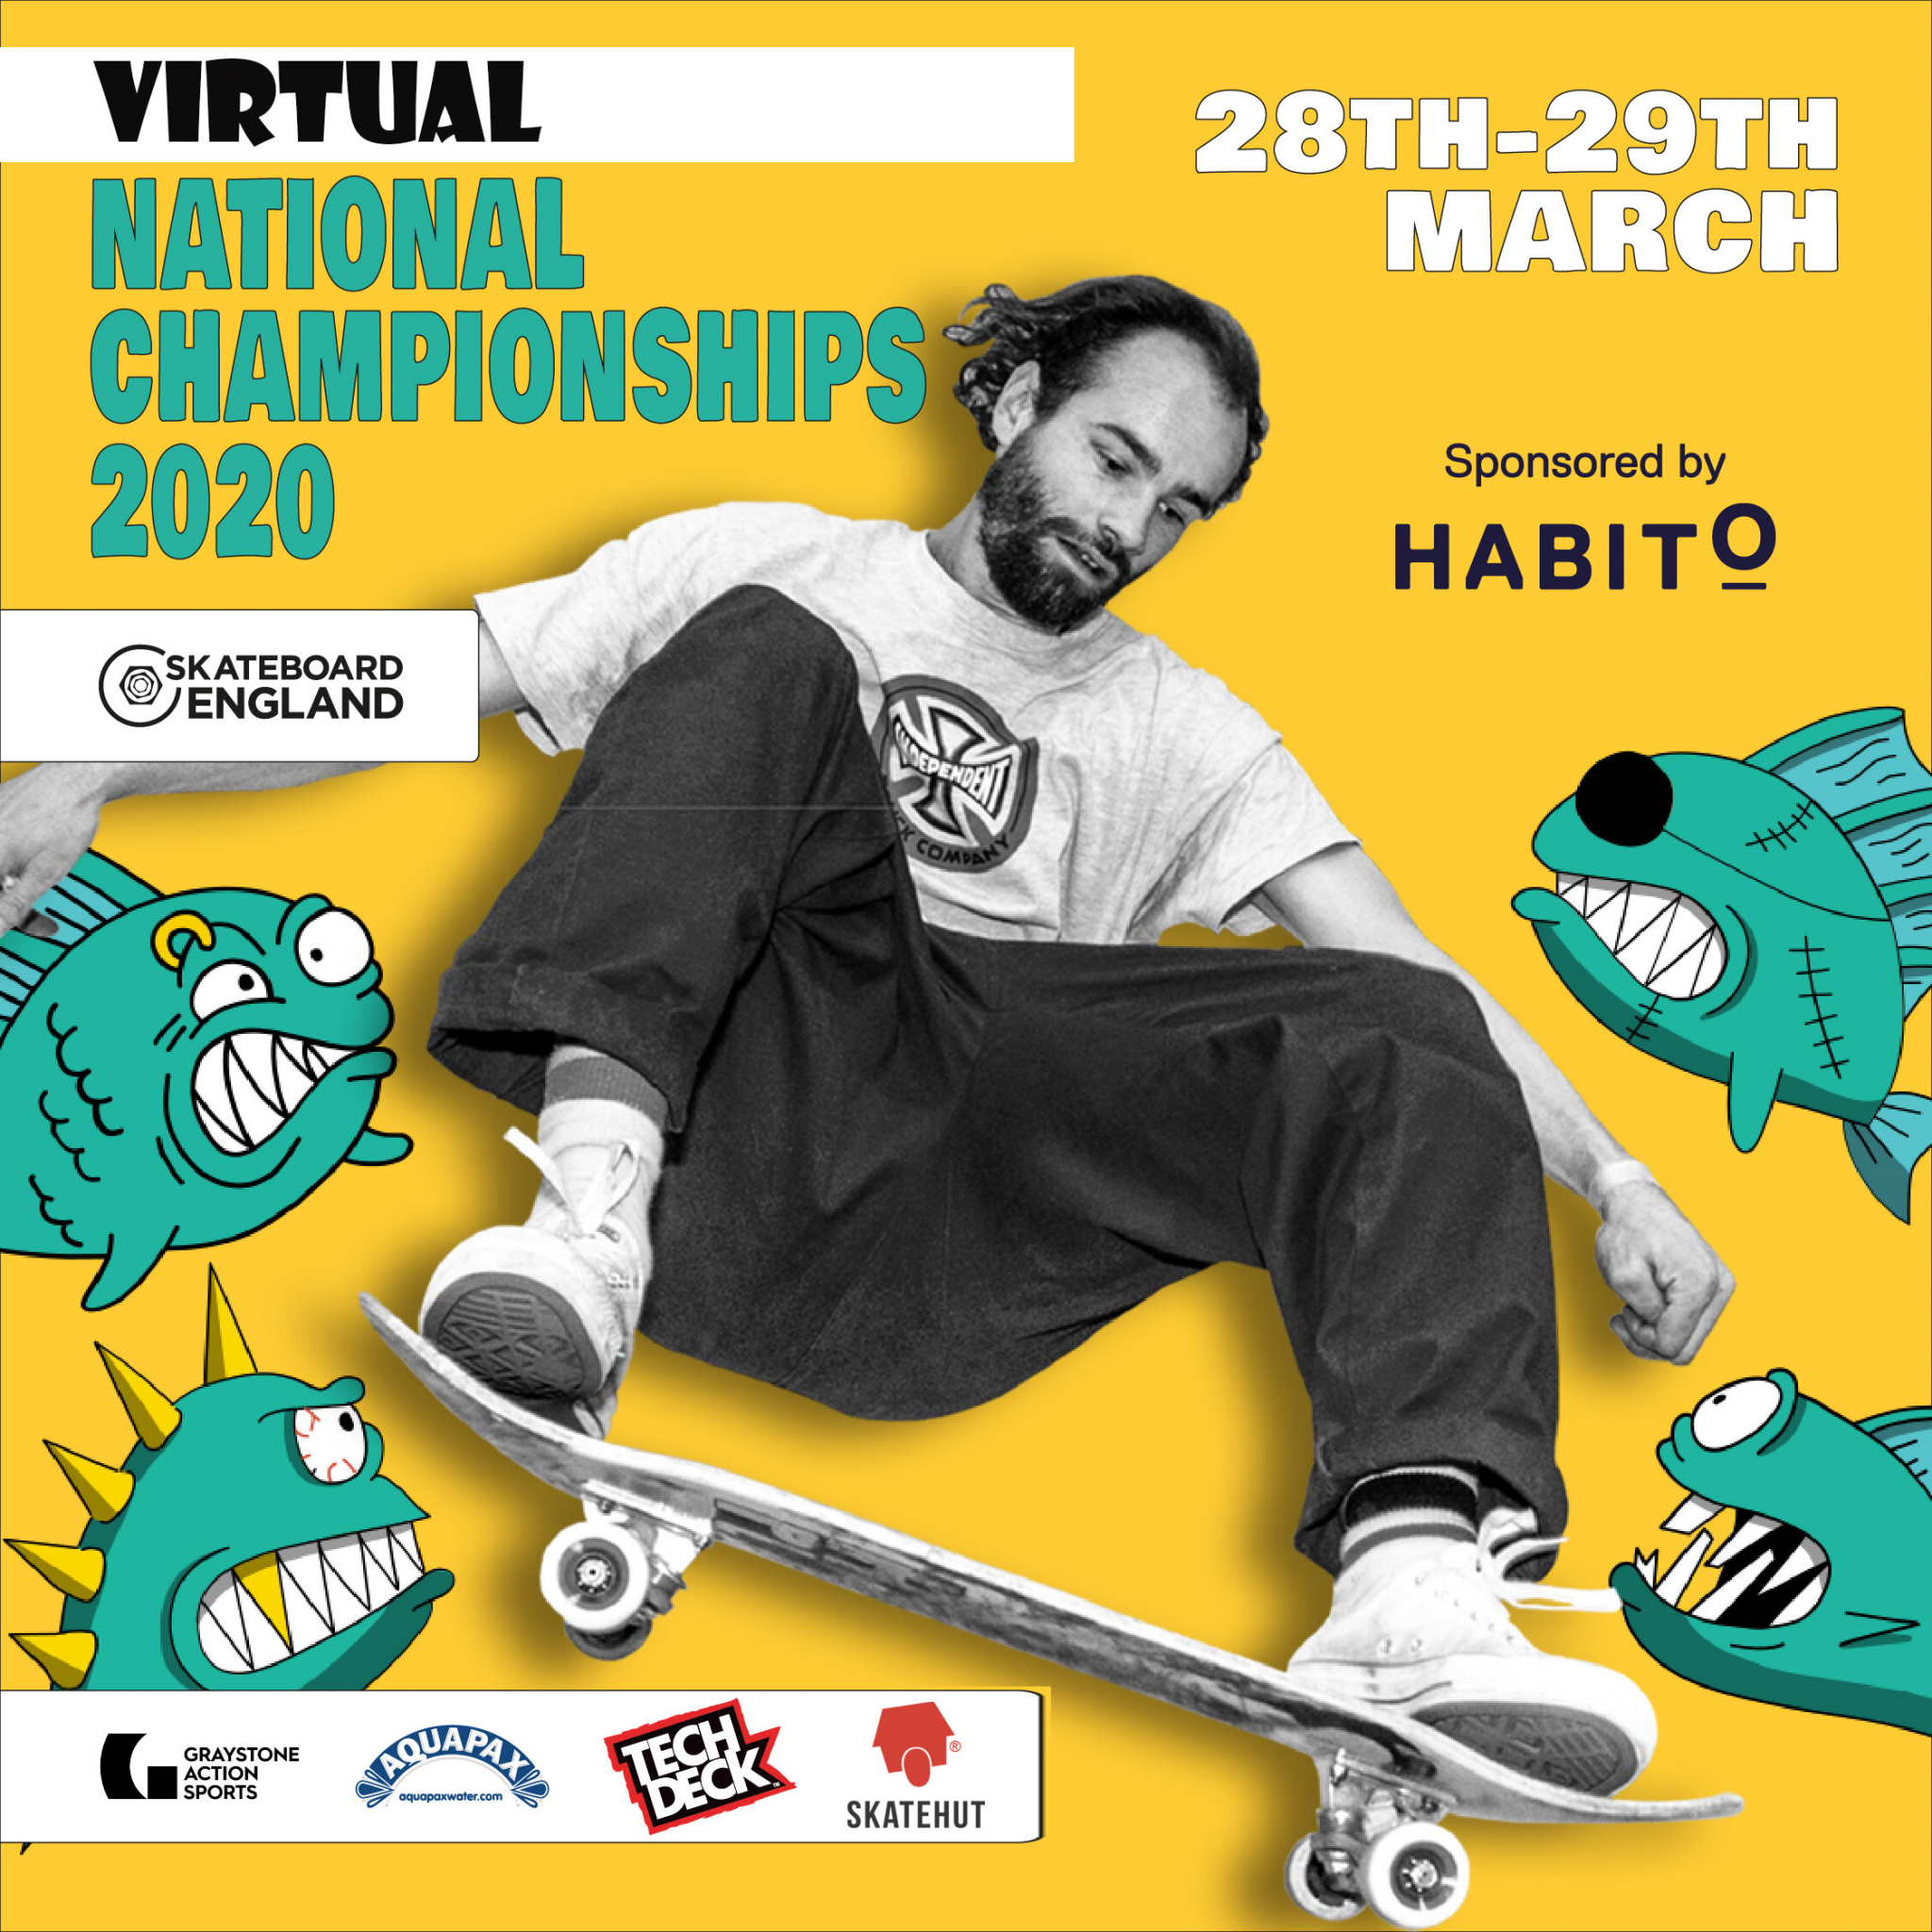 Skateboard England to stage virtual National Championships during pandemic